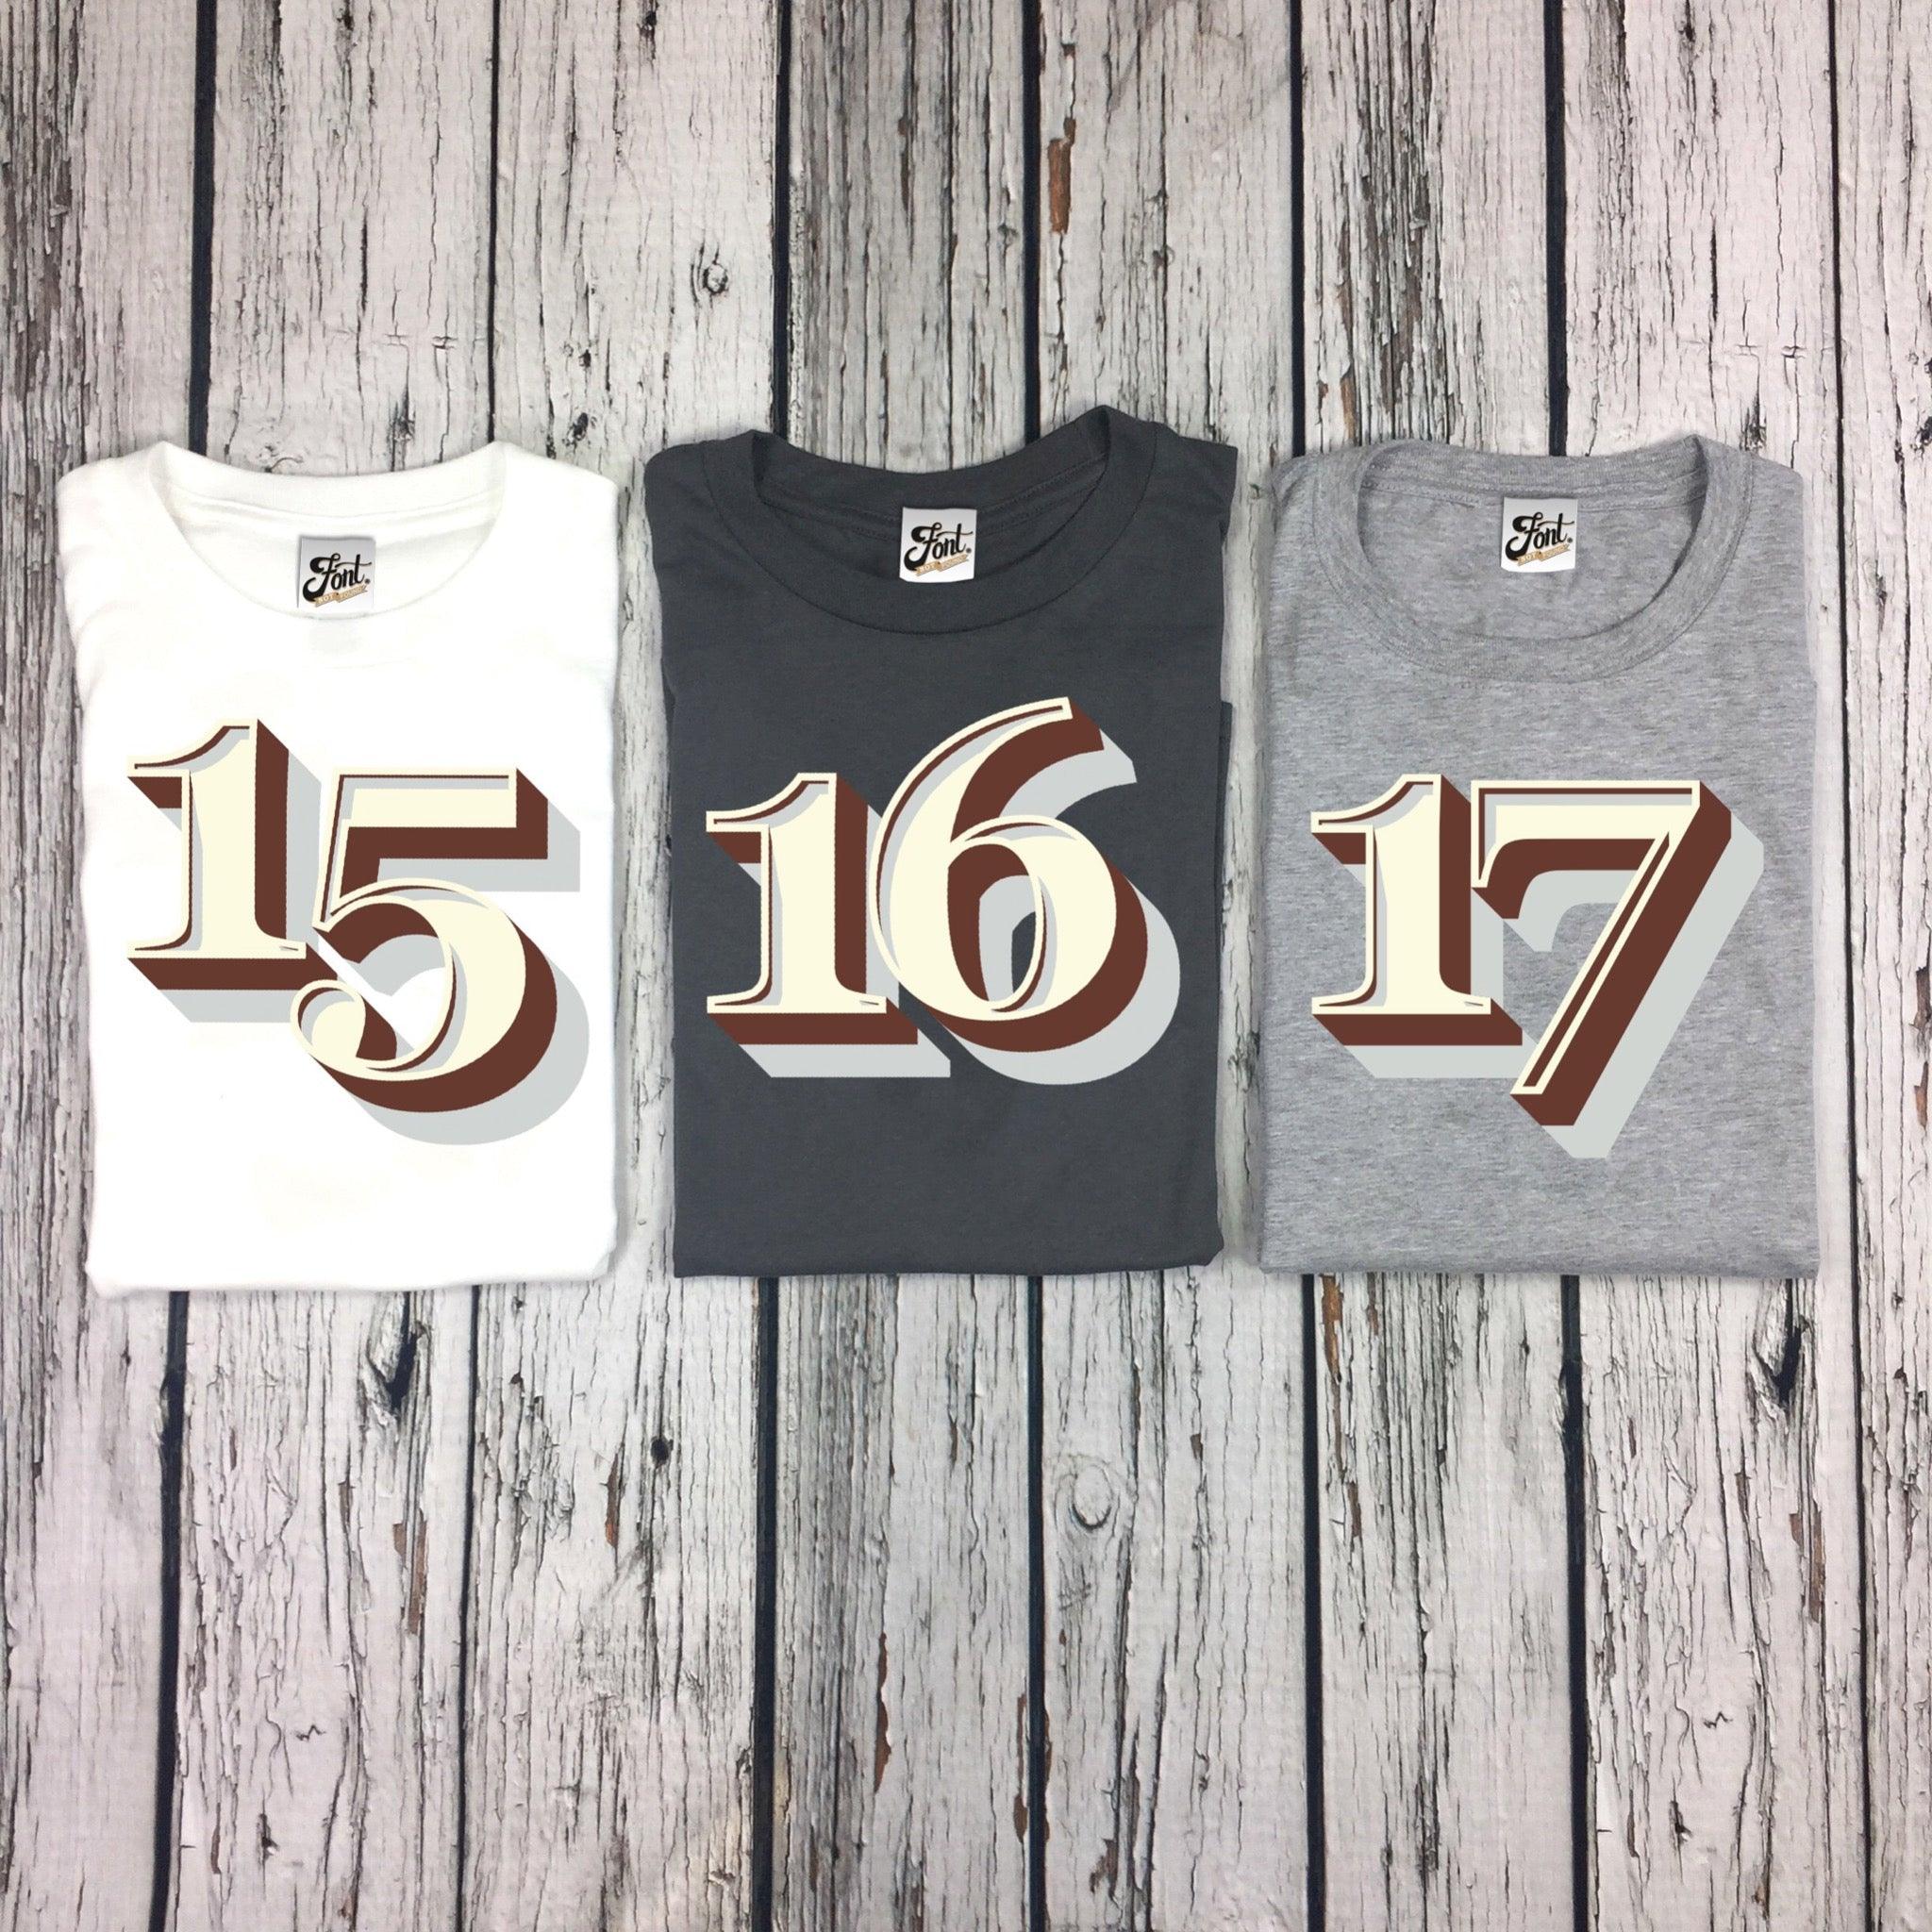 Birthdays 15, 16, 17, 18, 19, 20, 21 Male/Female T-Shirt - Stirling Shadow Font Not Found, Font: Stirling Shadow, Men's Clothes, T-Shirt: Numbers, T-Shirts, Teen Clothes, Womens Clothes 44ideas.co.uk